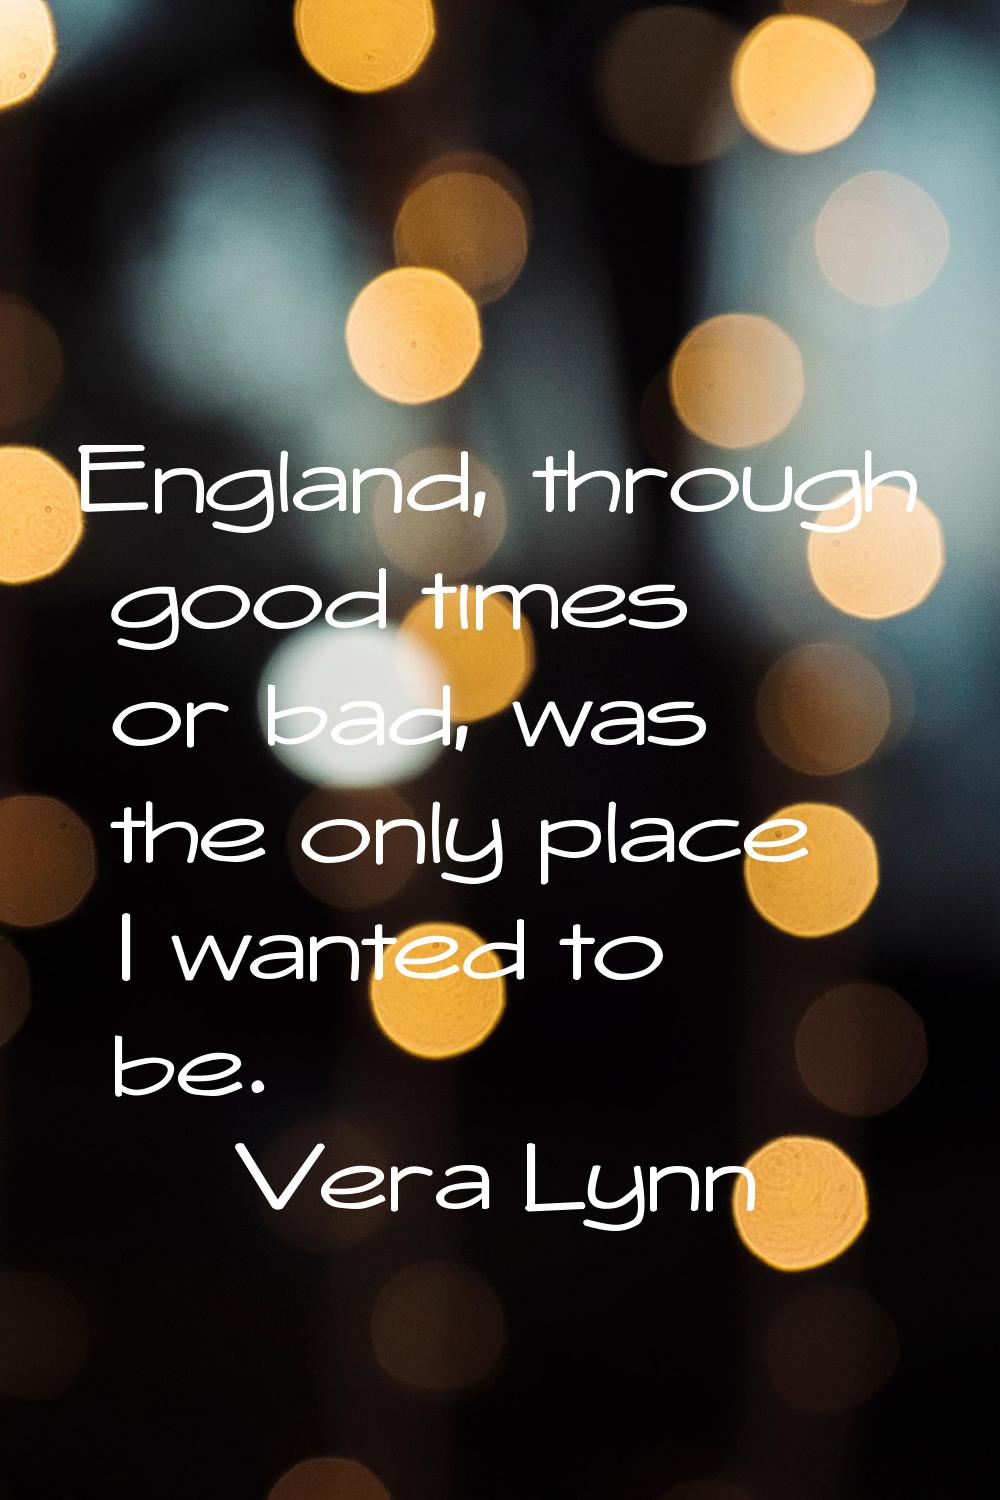 England, through good times or bad, was the only place I wanted to be.